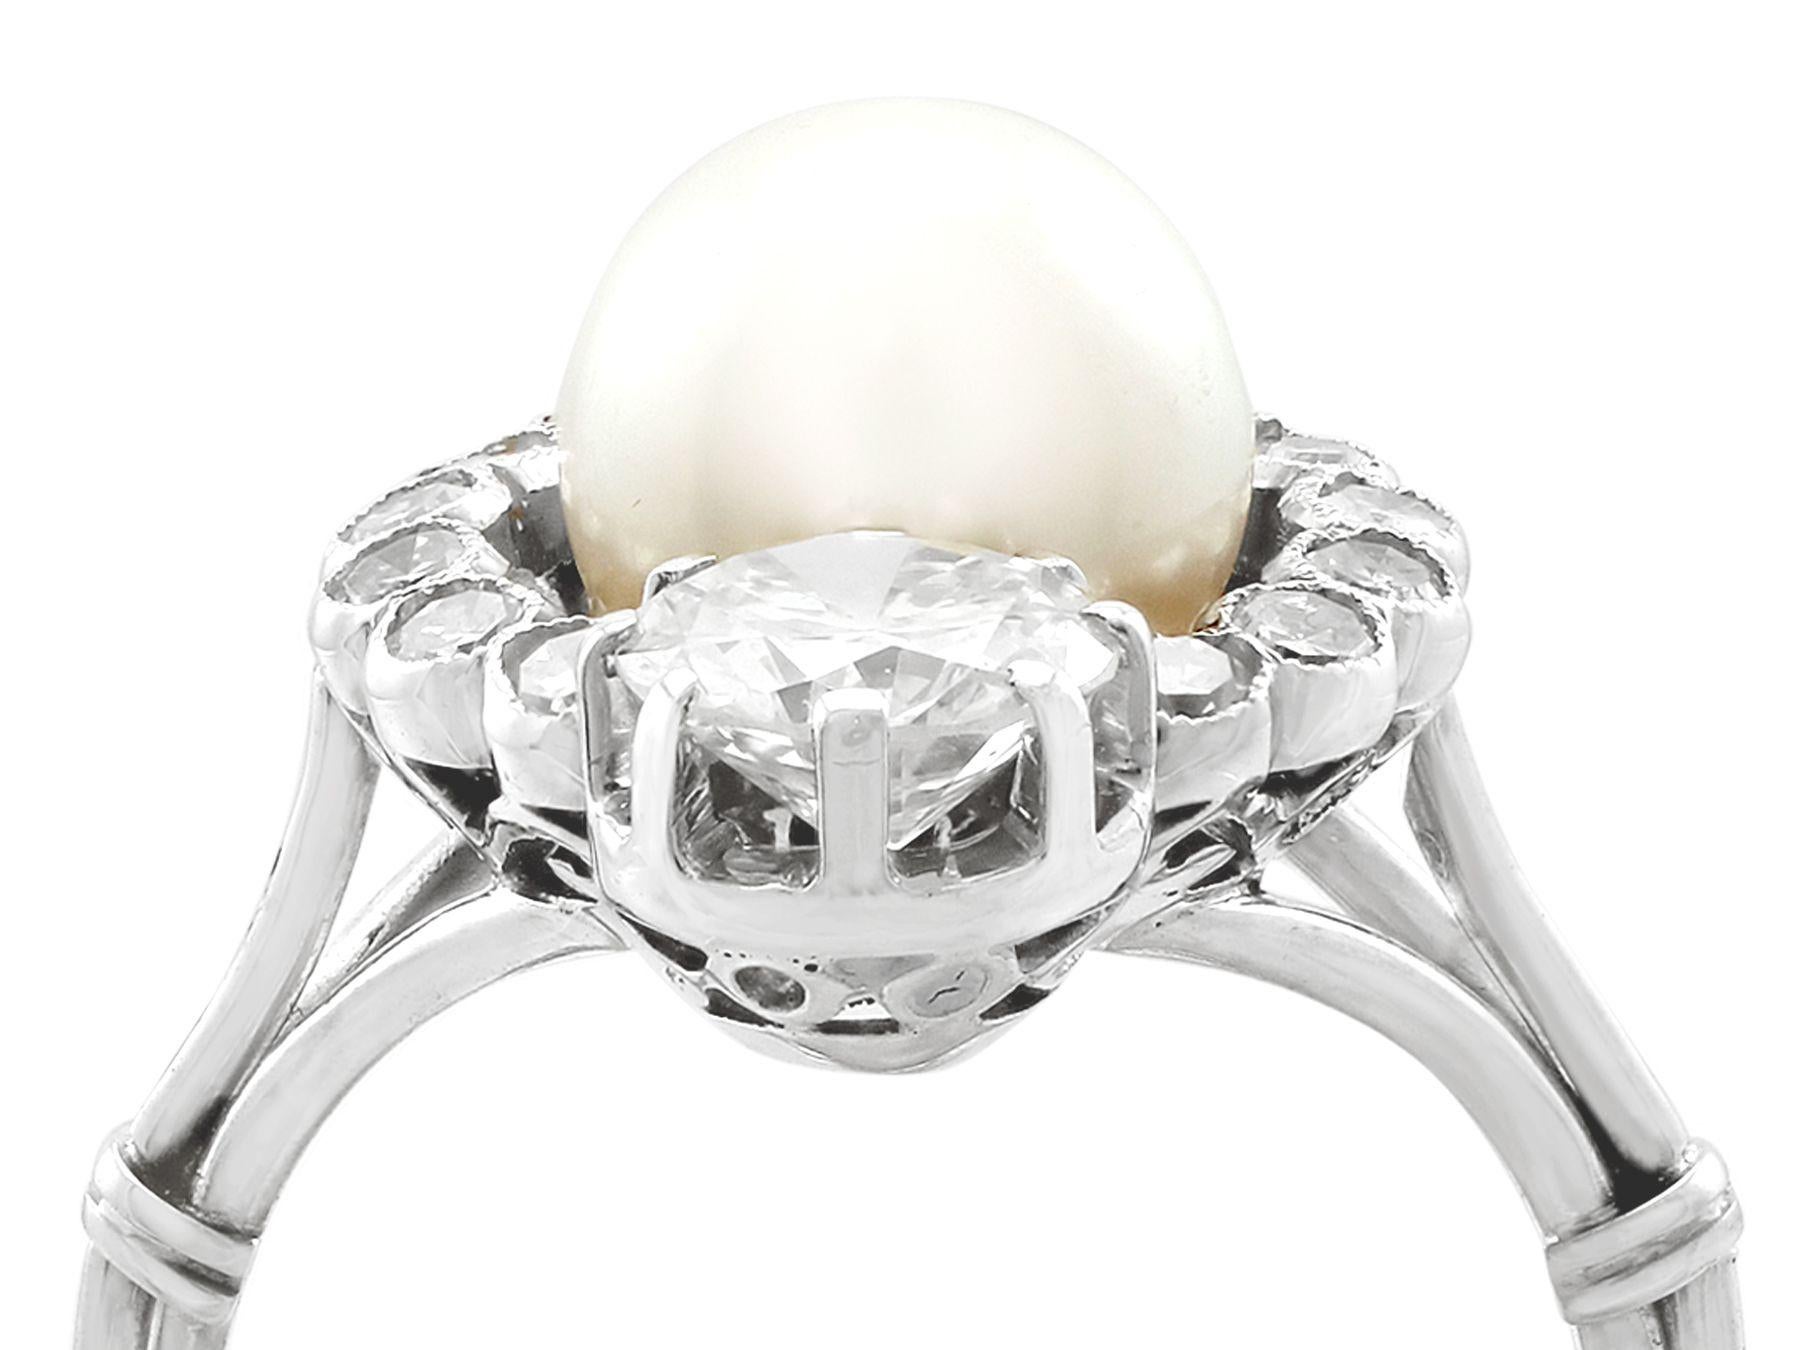 A stunning antique 1930s natural pearl and 1.59 carat diamond, 18 karat white gold dress ring; part of our diverse antique jewelry and estate jewelry collections.

This stunning, fine and impressive large antique pearl and diamond ring has been